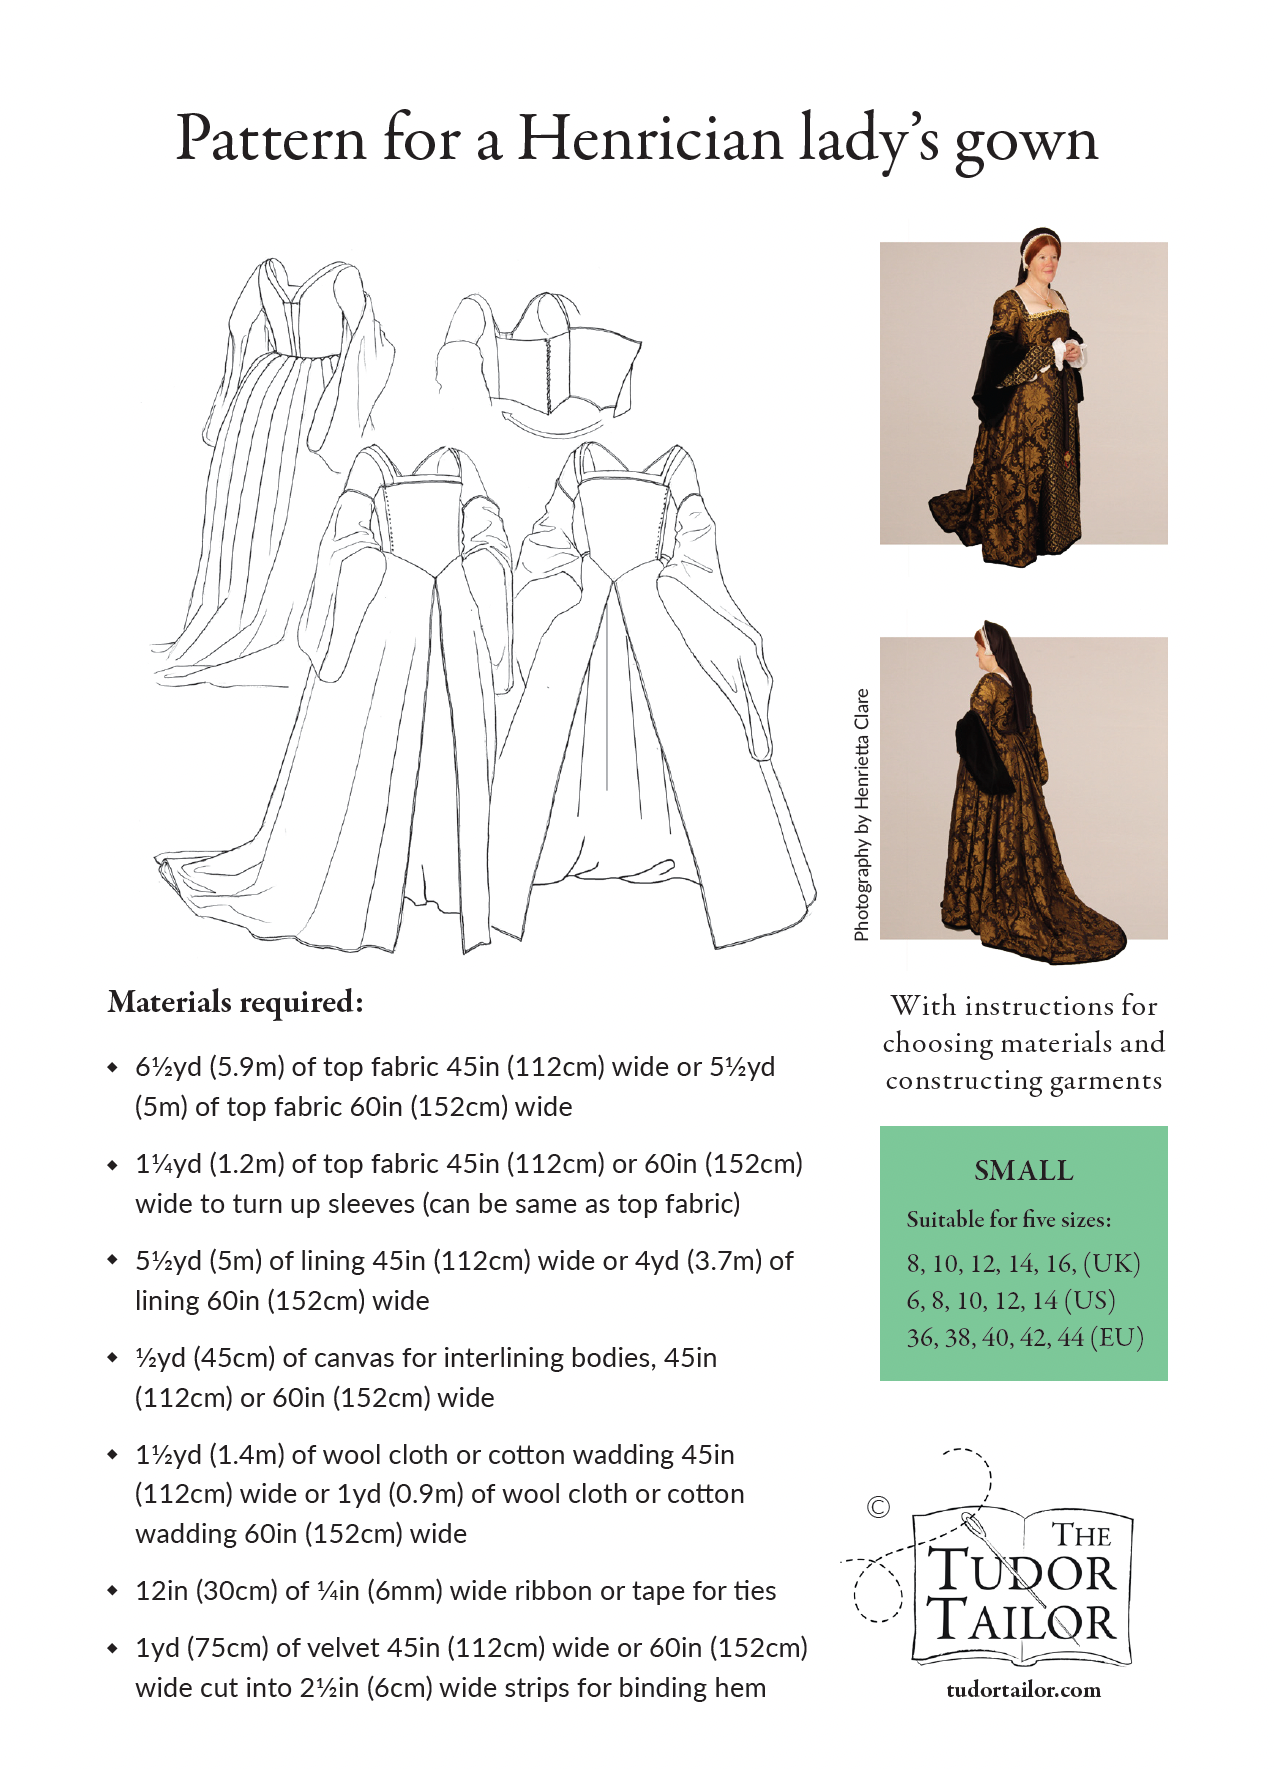 Pattern for Henrician lady's gown – The Tudor Tailor